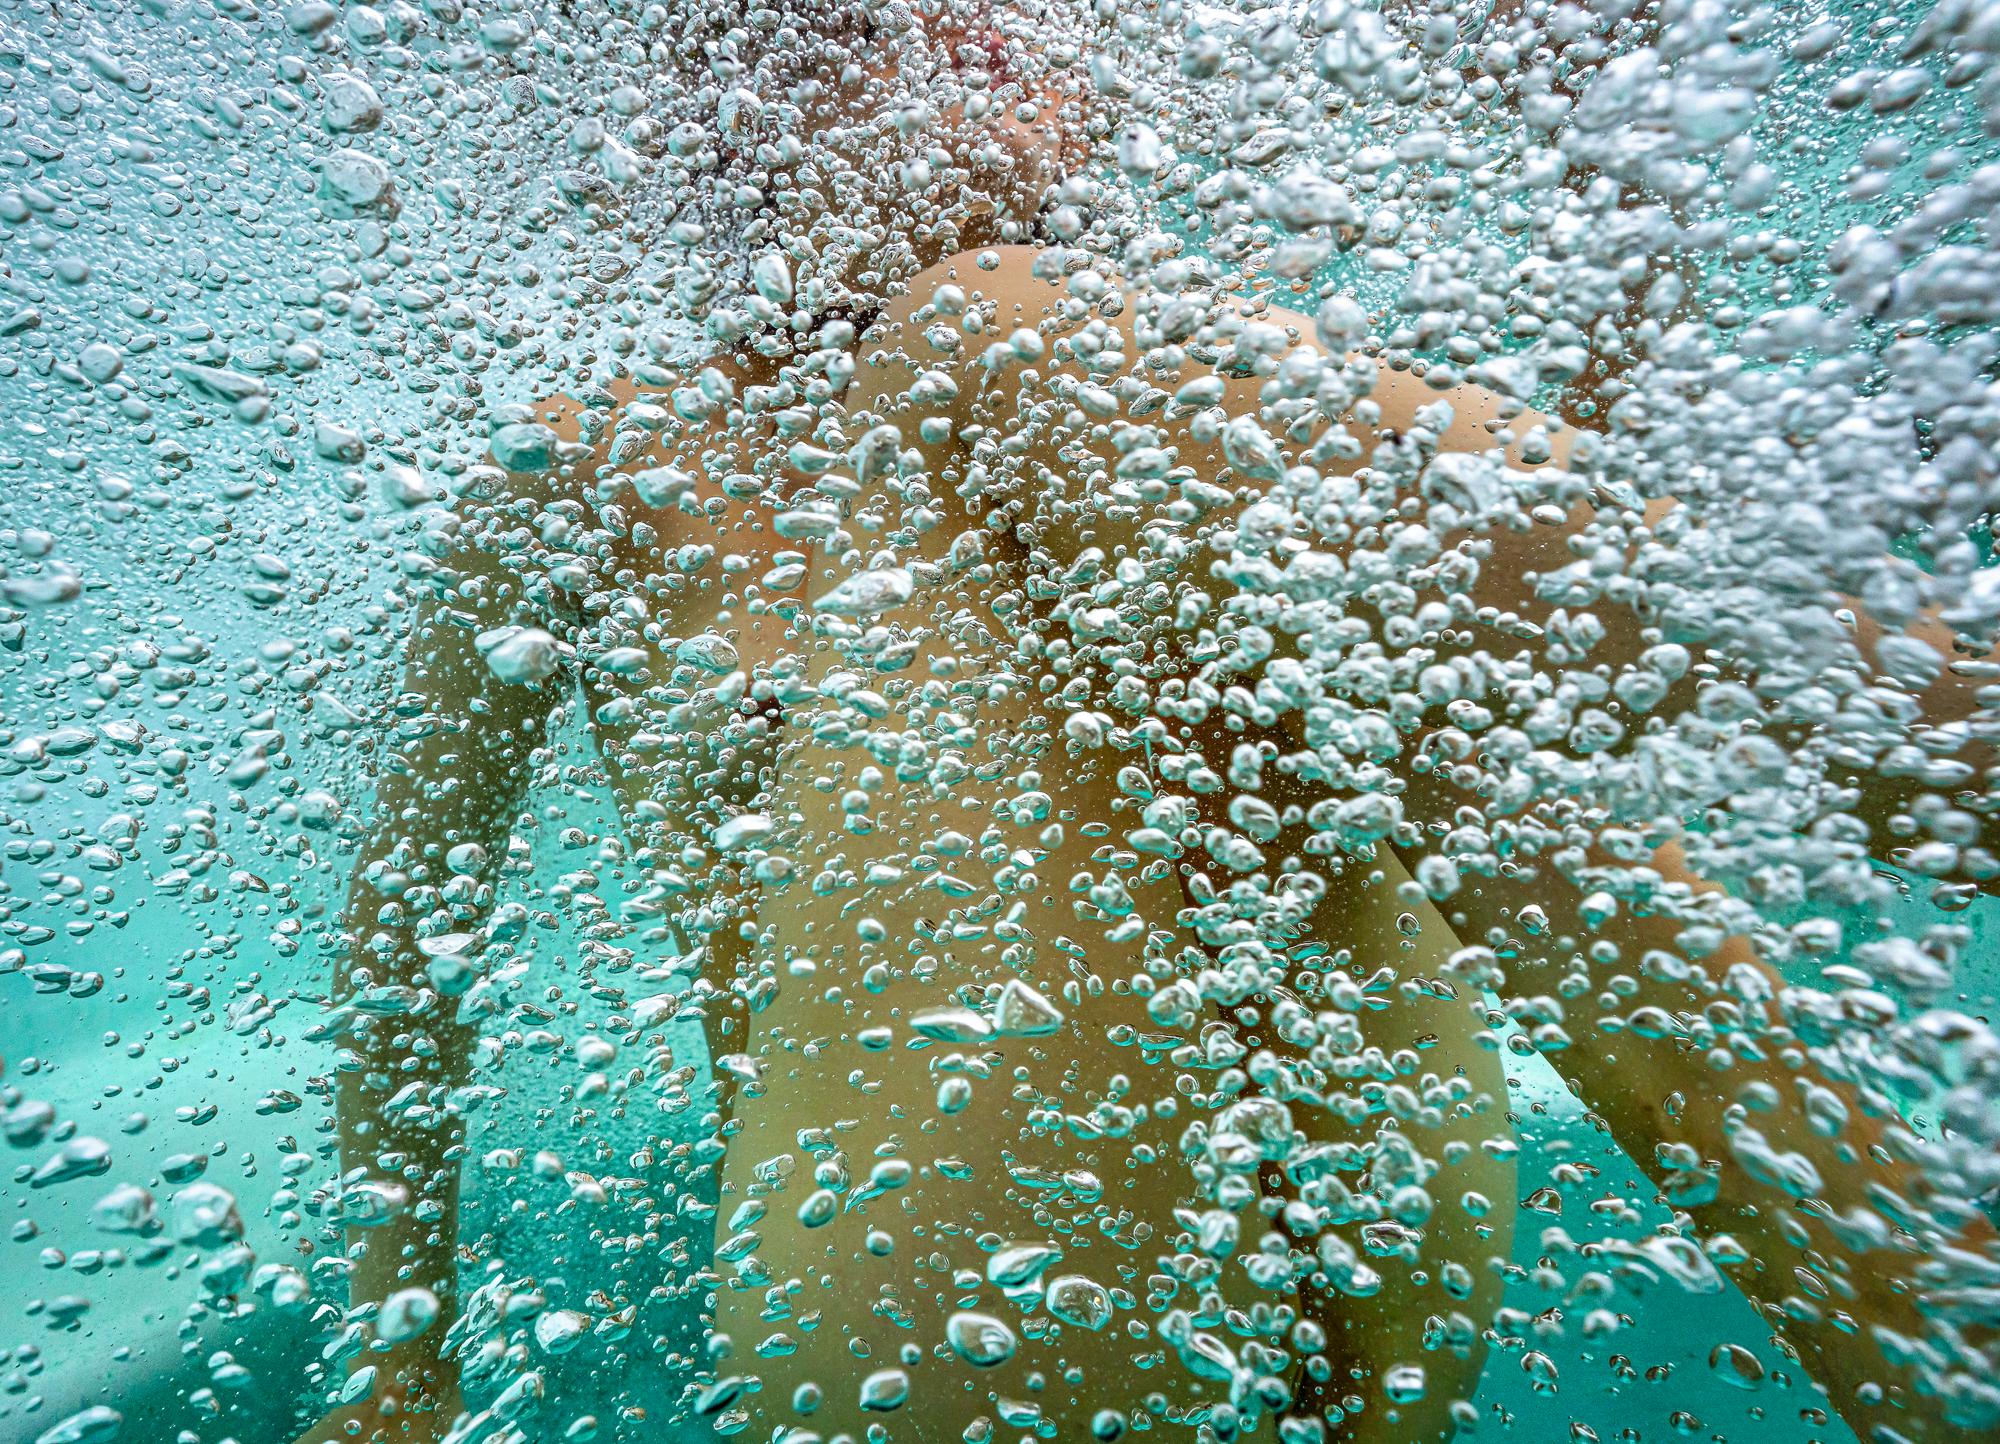 Hot Champagne  - underwater nude photograph - print on aluminum 8 x 12"